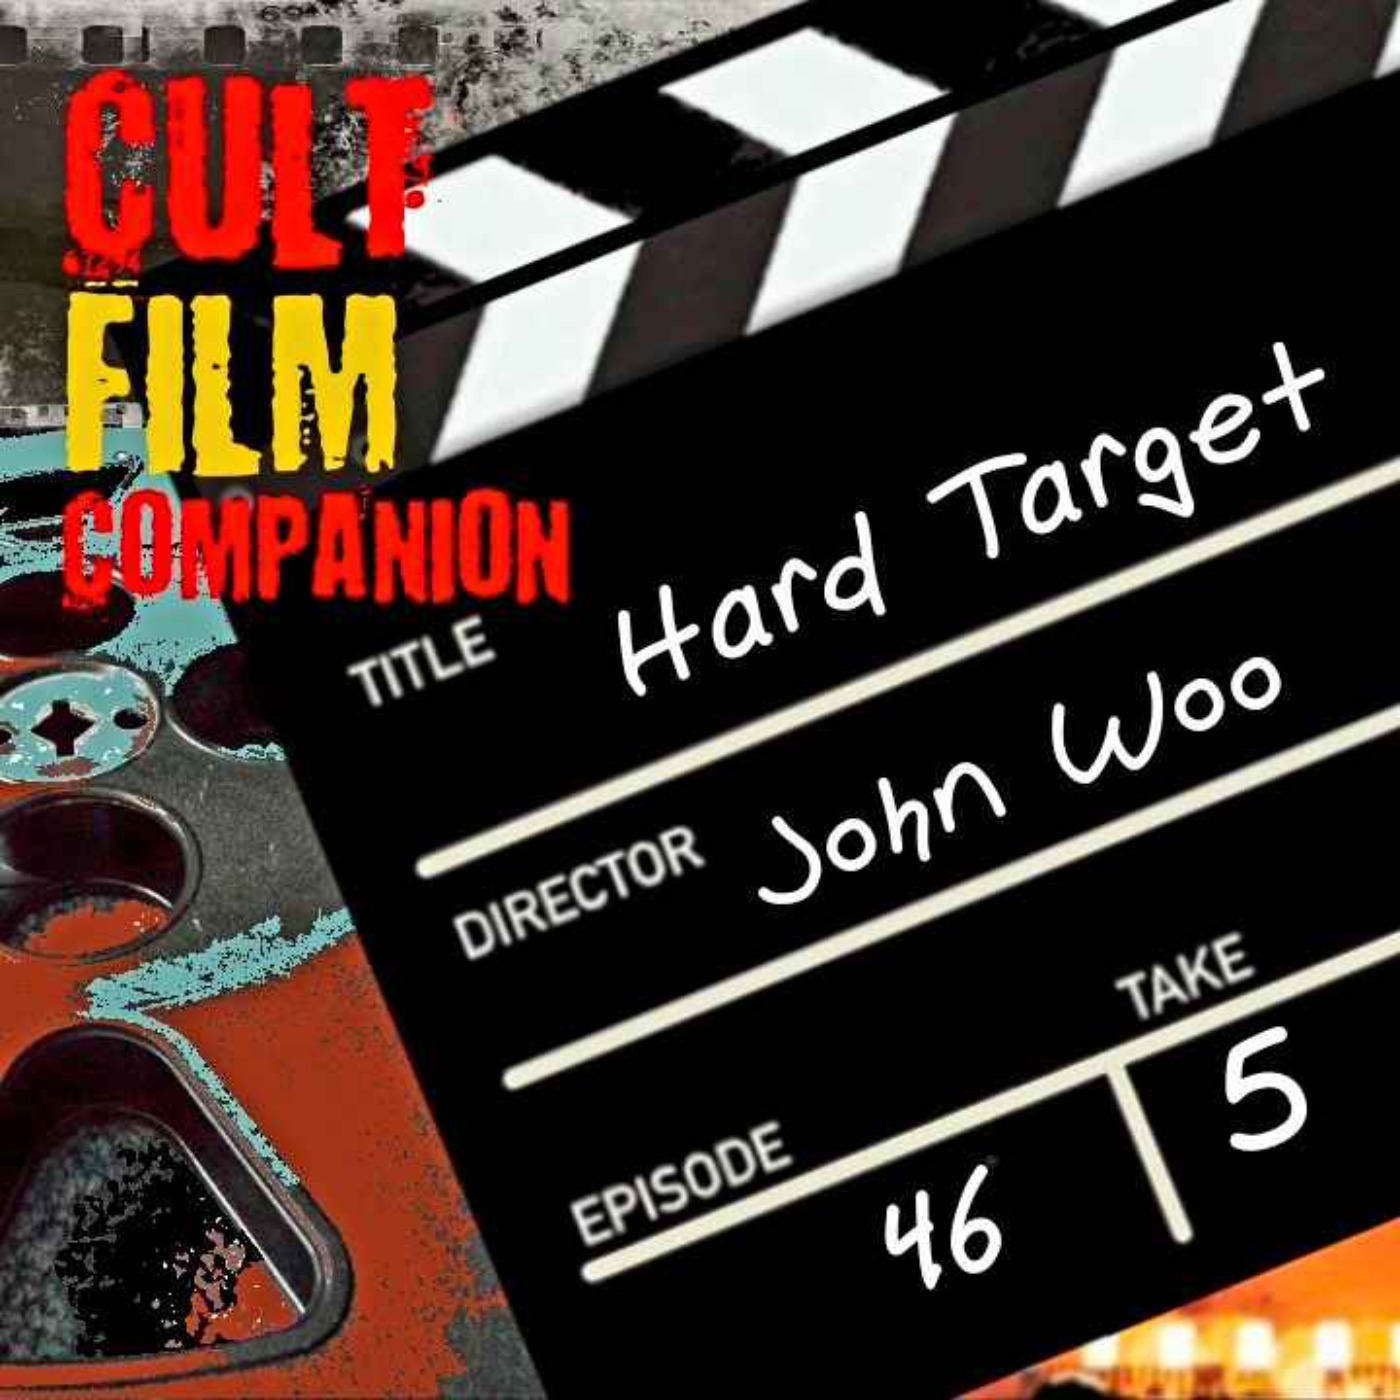 cover art for Ep. 46 Hard Target directed by John Woo